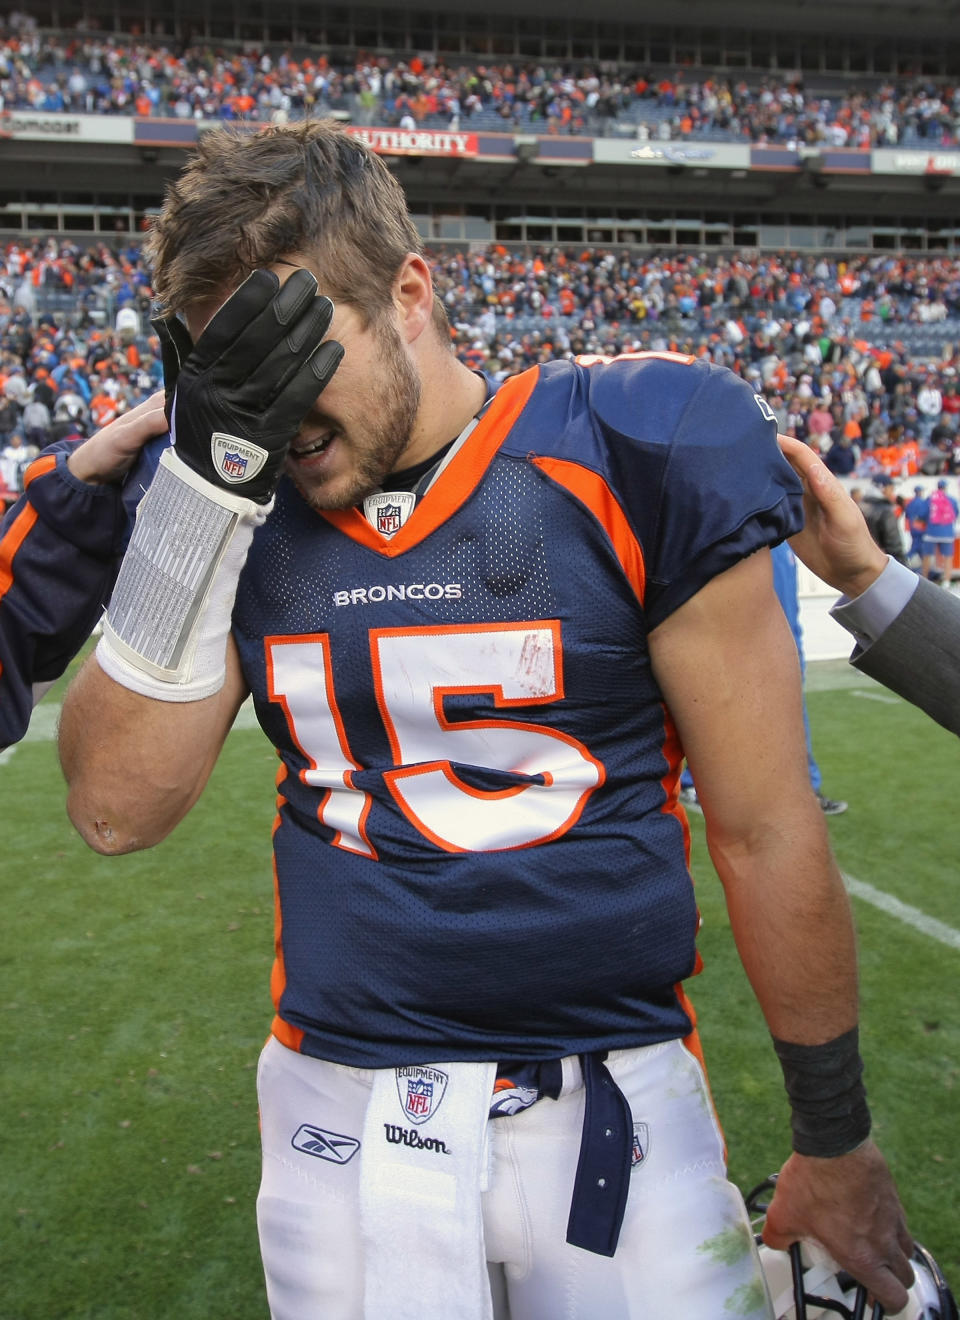 DENVER, CO - OCTOBER 09: Quarterback Tim Tebow #15 of the Denver Broncos reacts after the Broncos were defeated 29-24 by the San Diego Chargers at Sports Authority Field at Mile High on October 9, 2011 in Denver, Colorado. (Photo by Doug Pensinger/Getty Images)